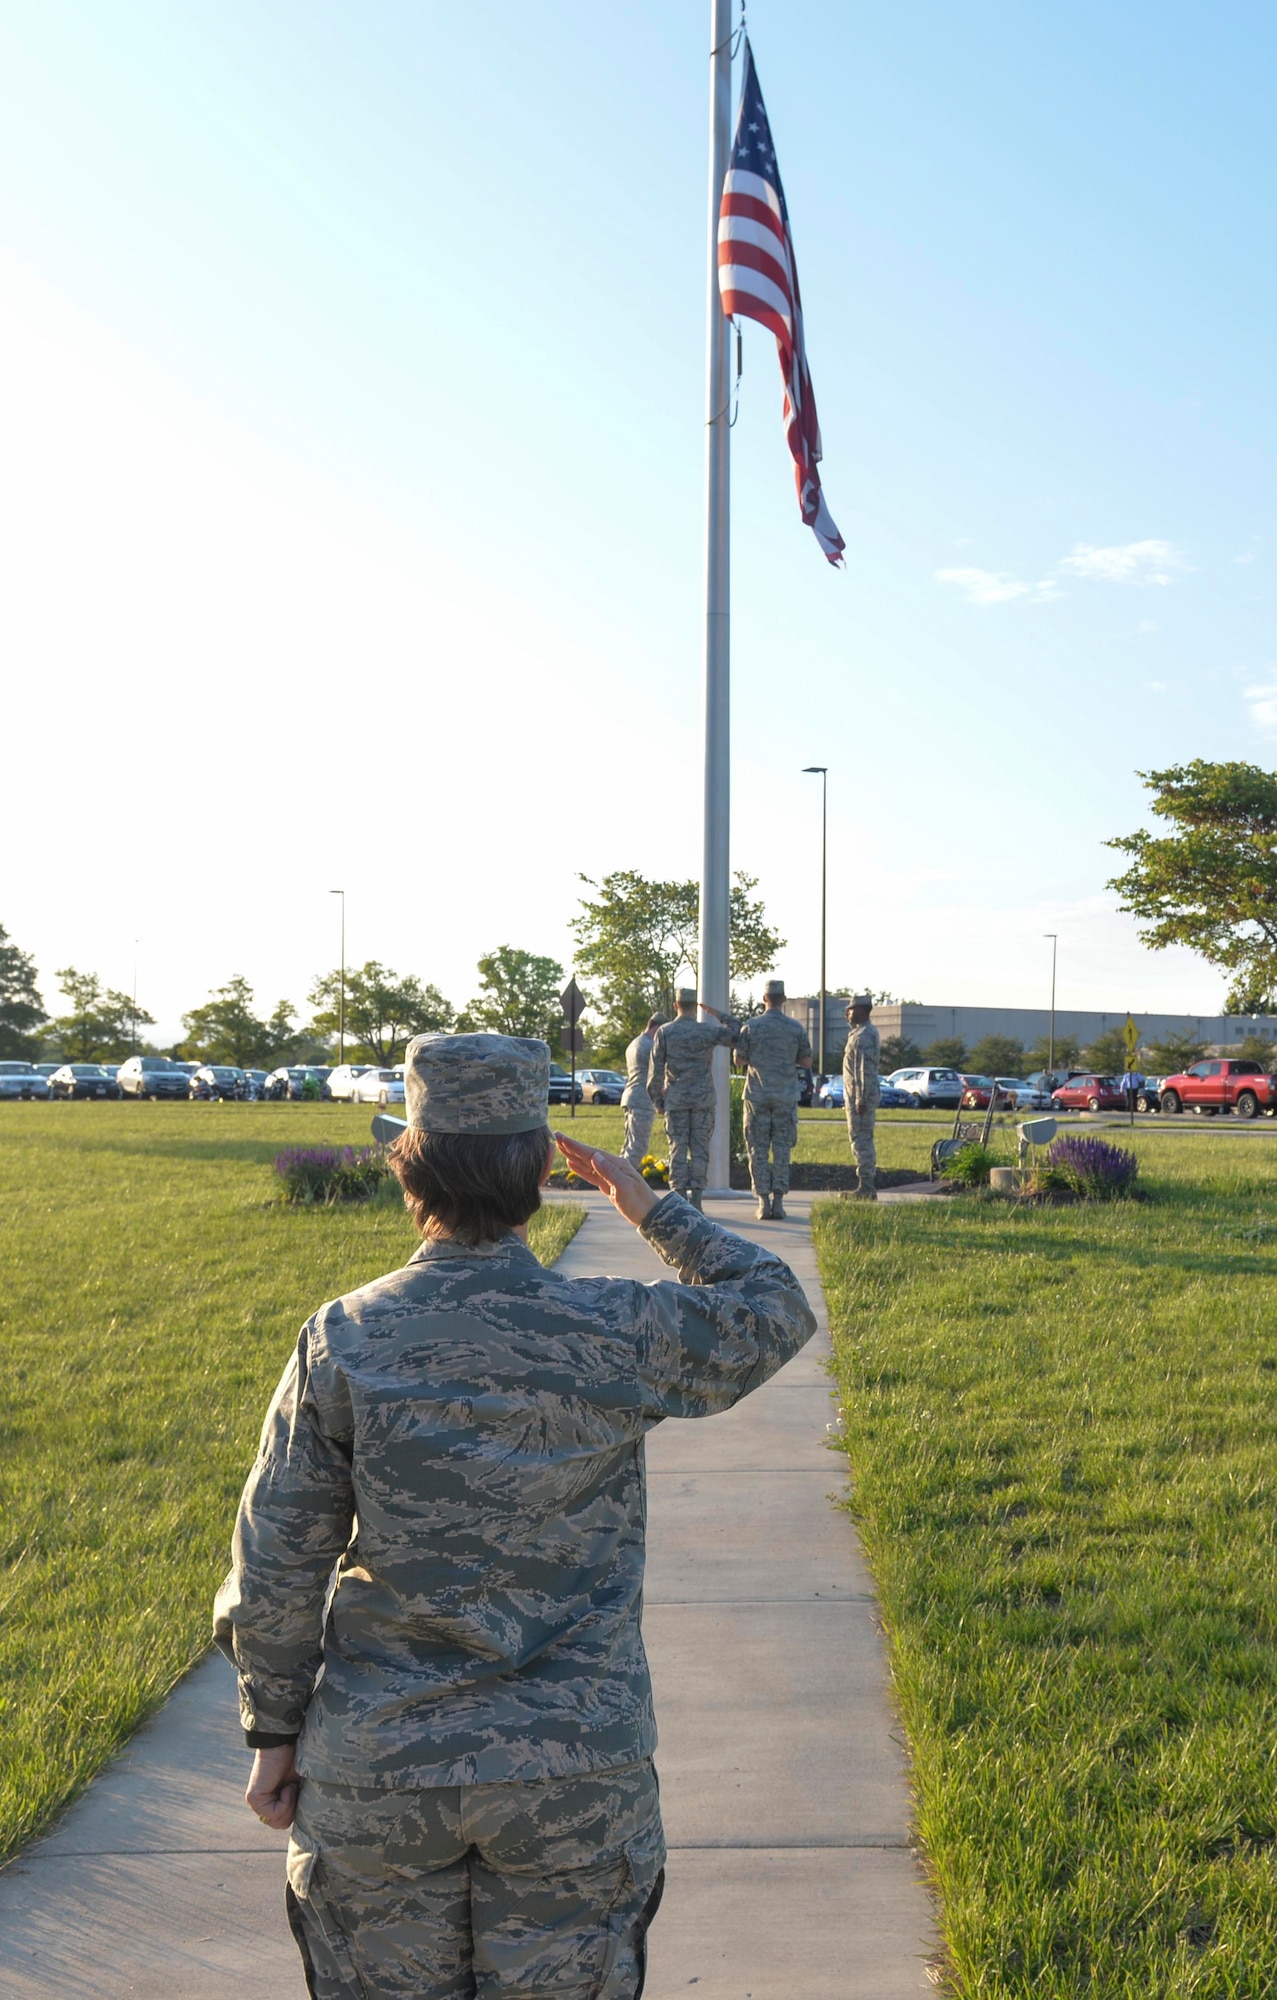 Wright-Patterson AFB, Ohio -- Col. Trish Sexton, NASIC vice commander, salutes while the NASIC color guard raise a U.S. flag during reveille here May 15. Sexton has carried the same U.S. flag from assignment to assignment throughout her career.  "It was given to me by the Airmen from my second assignment and had been flown over the headquarters of my first assignment " said Sexton. "It has been everywhere with me." The flag will be used in Sexton's retirement ceremony July 13.